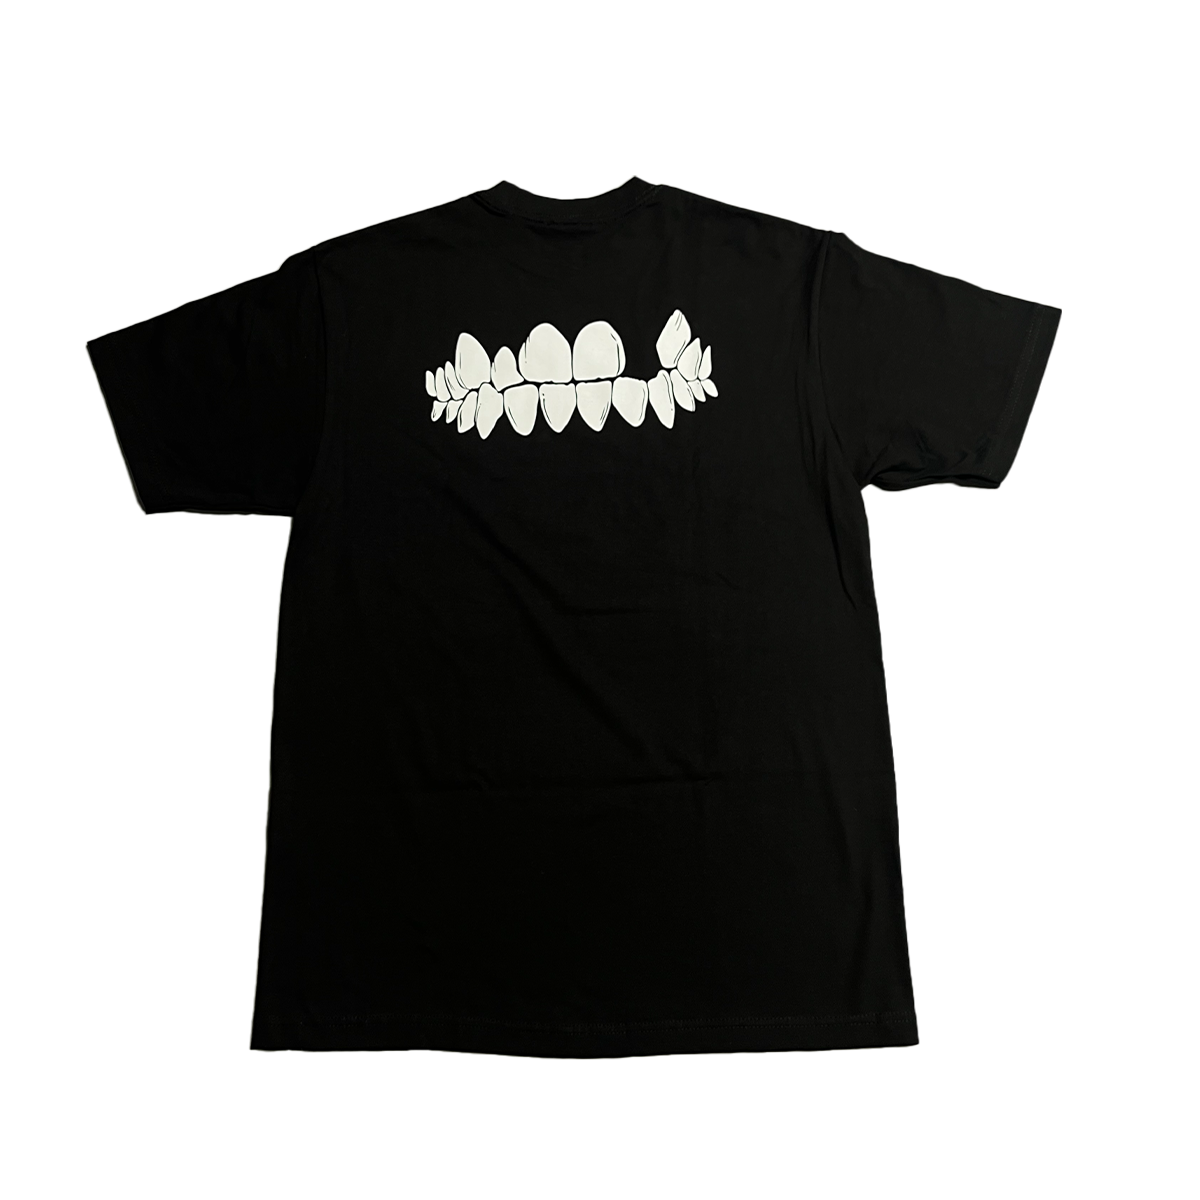 Teef s/s Tee Shirt Blk(size options listed)